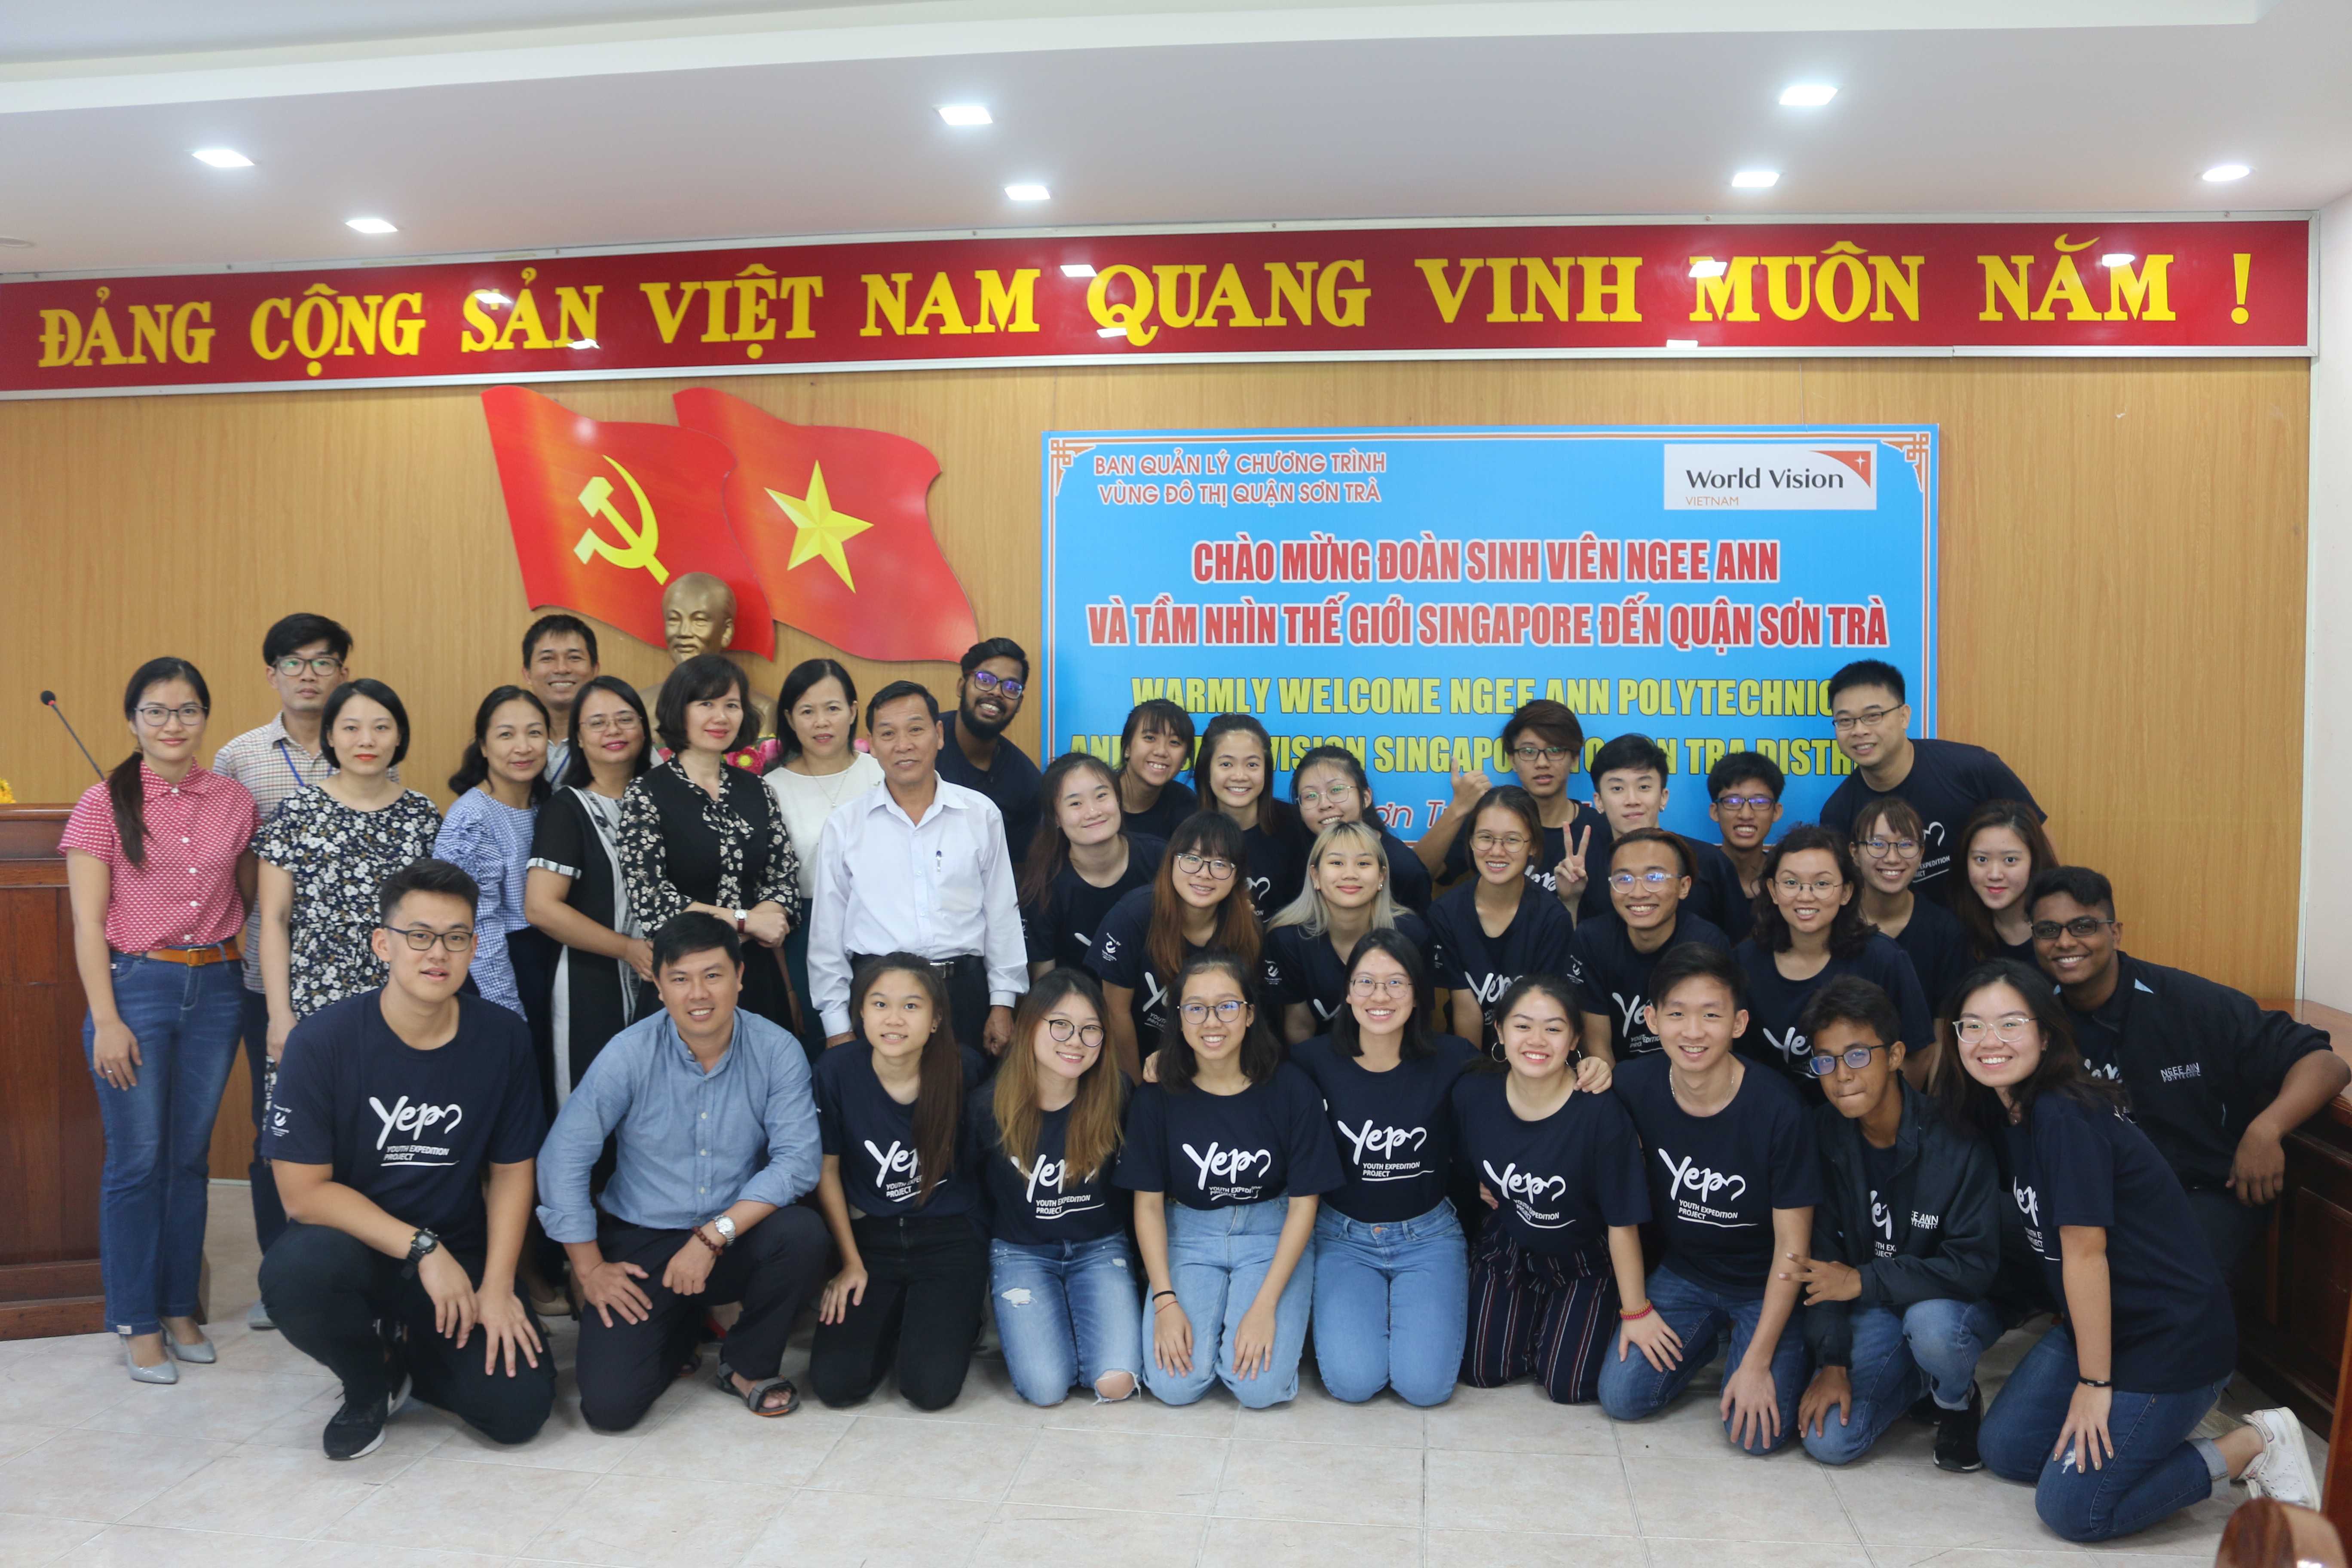 Our team paying a visit to the district office in Da Nang. 